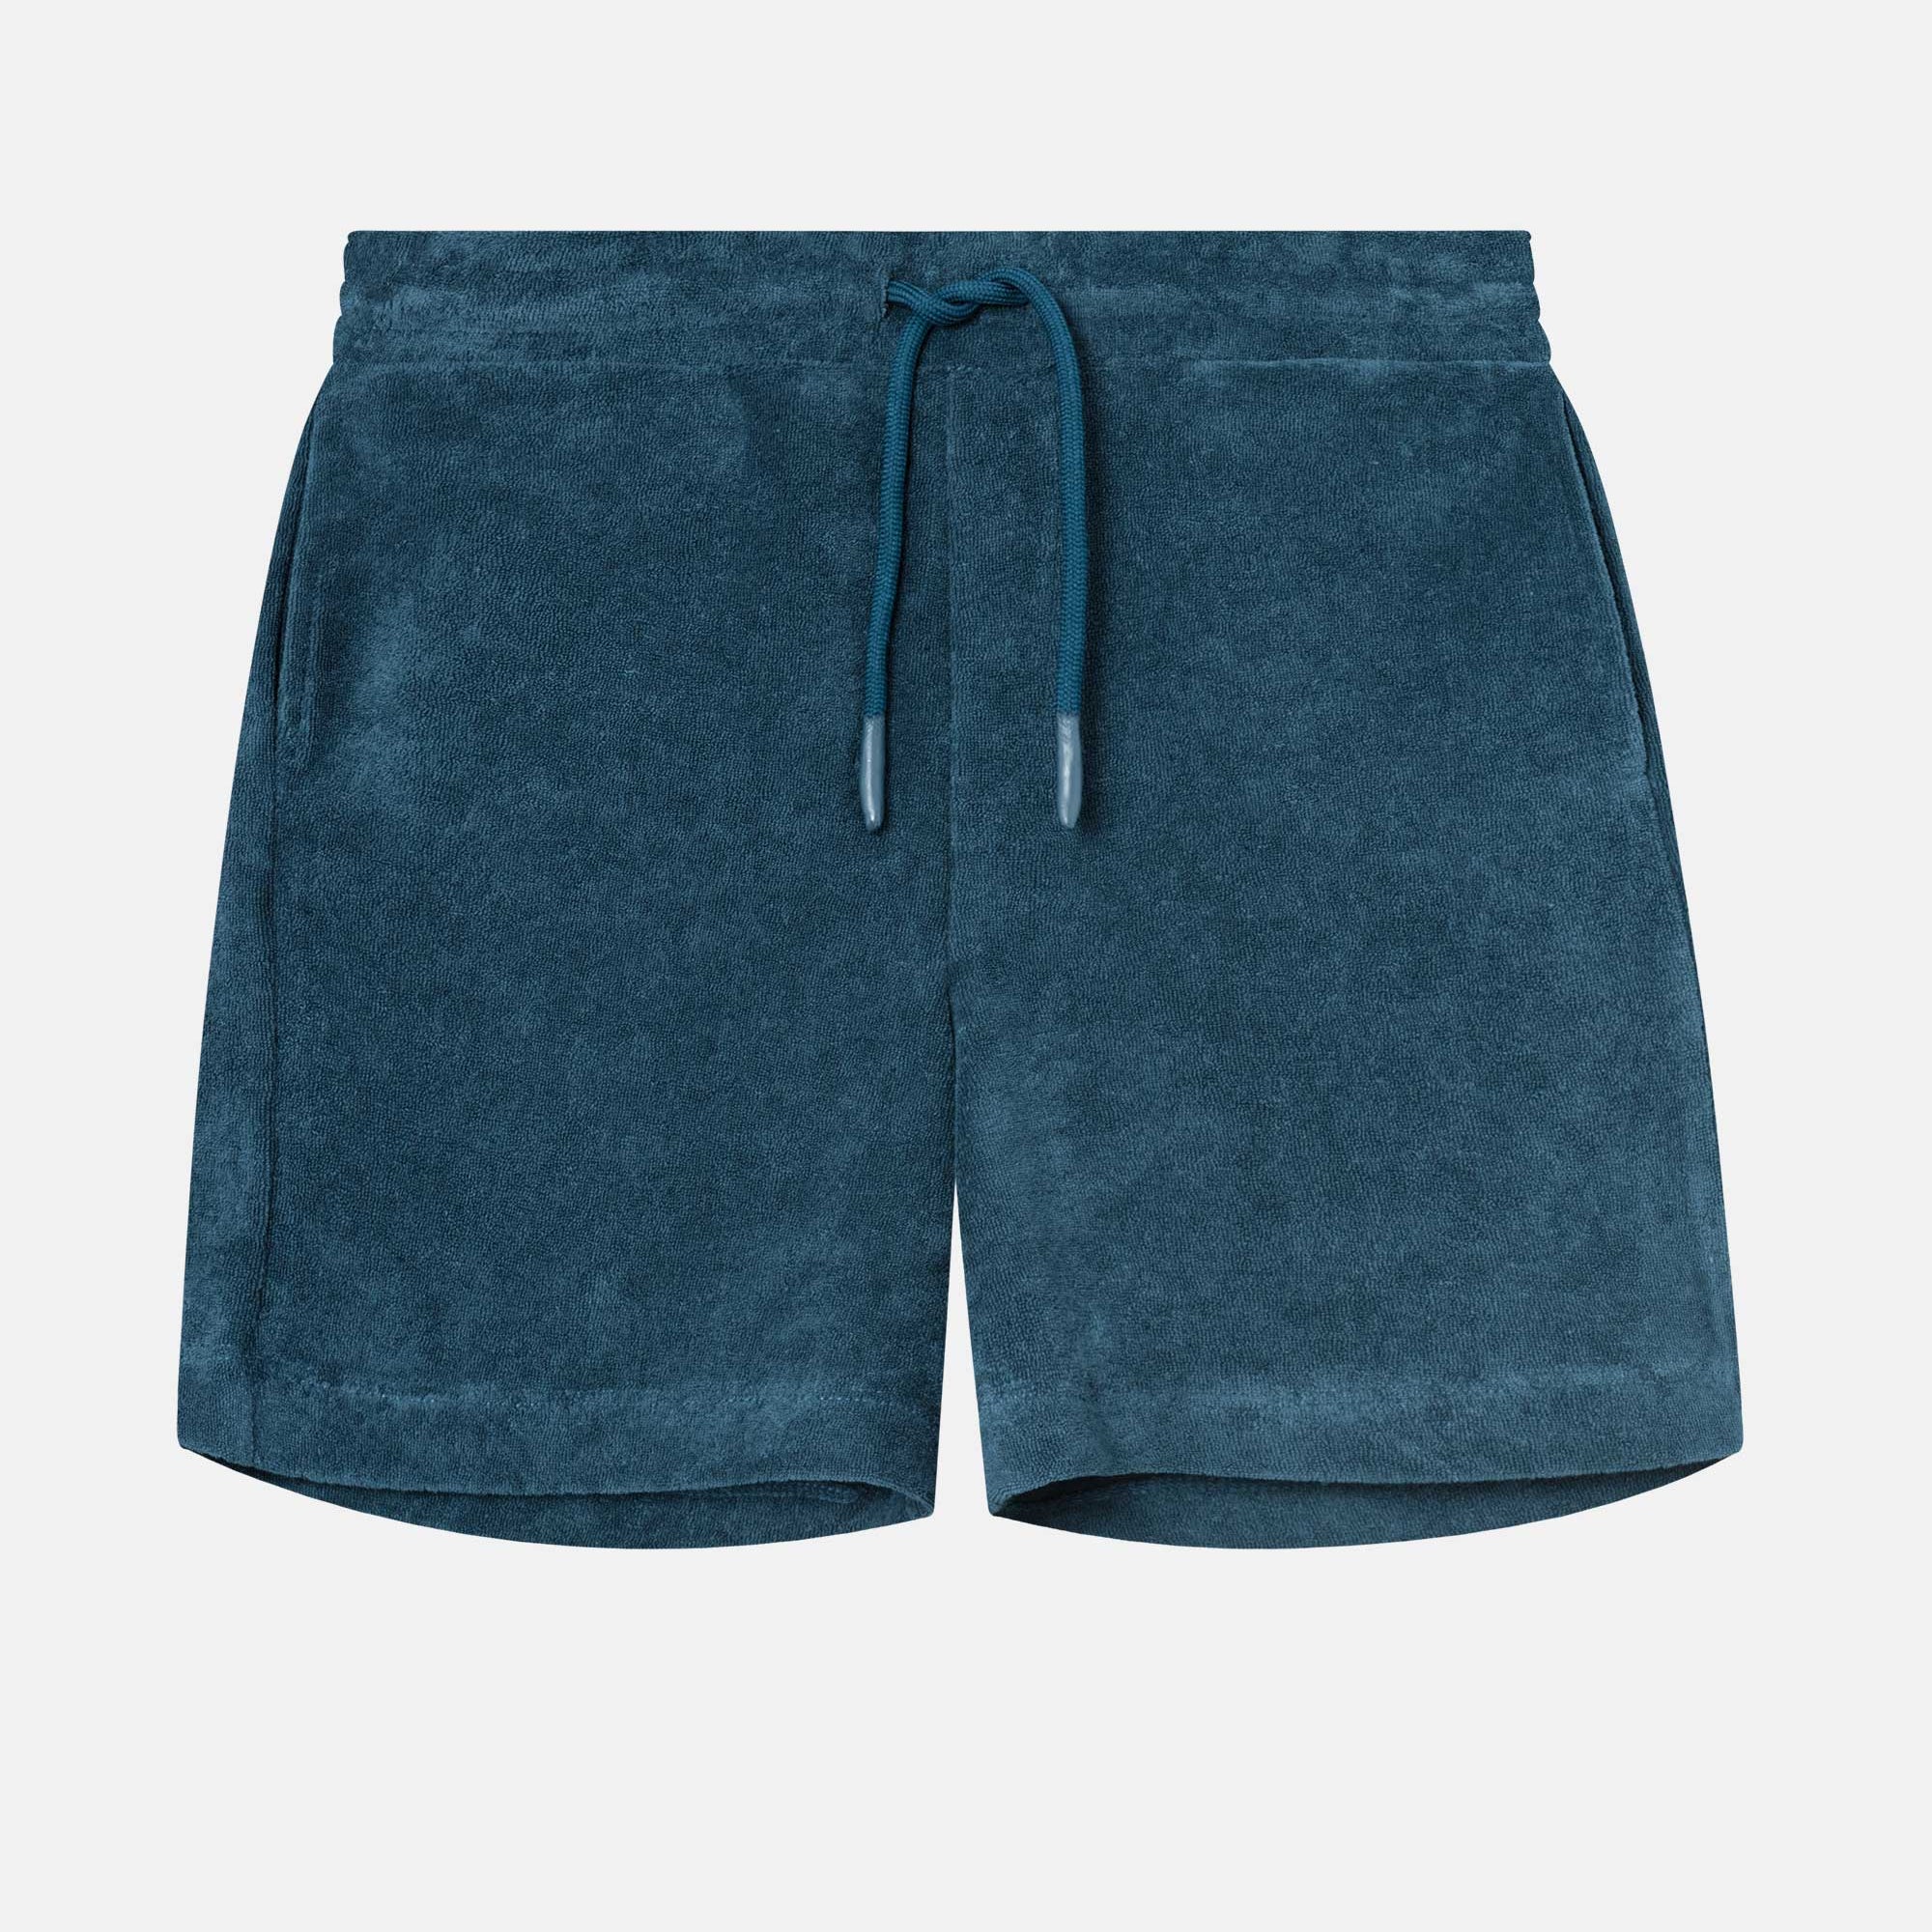 Dark blue mid length shorts in terry toweling fabric with drawdtring and two side pockets.